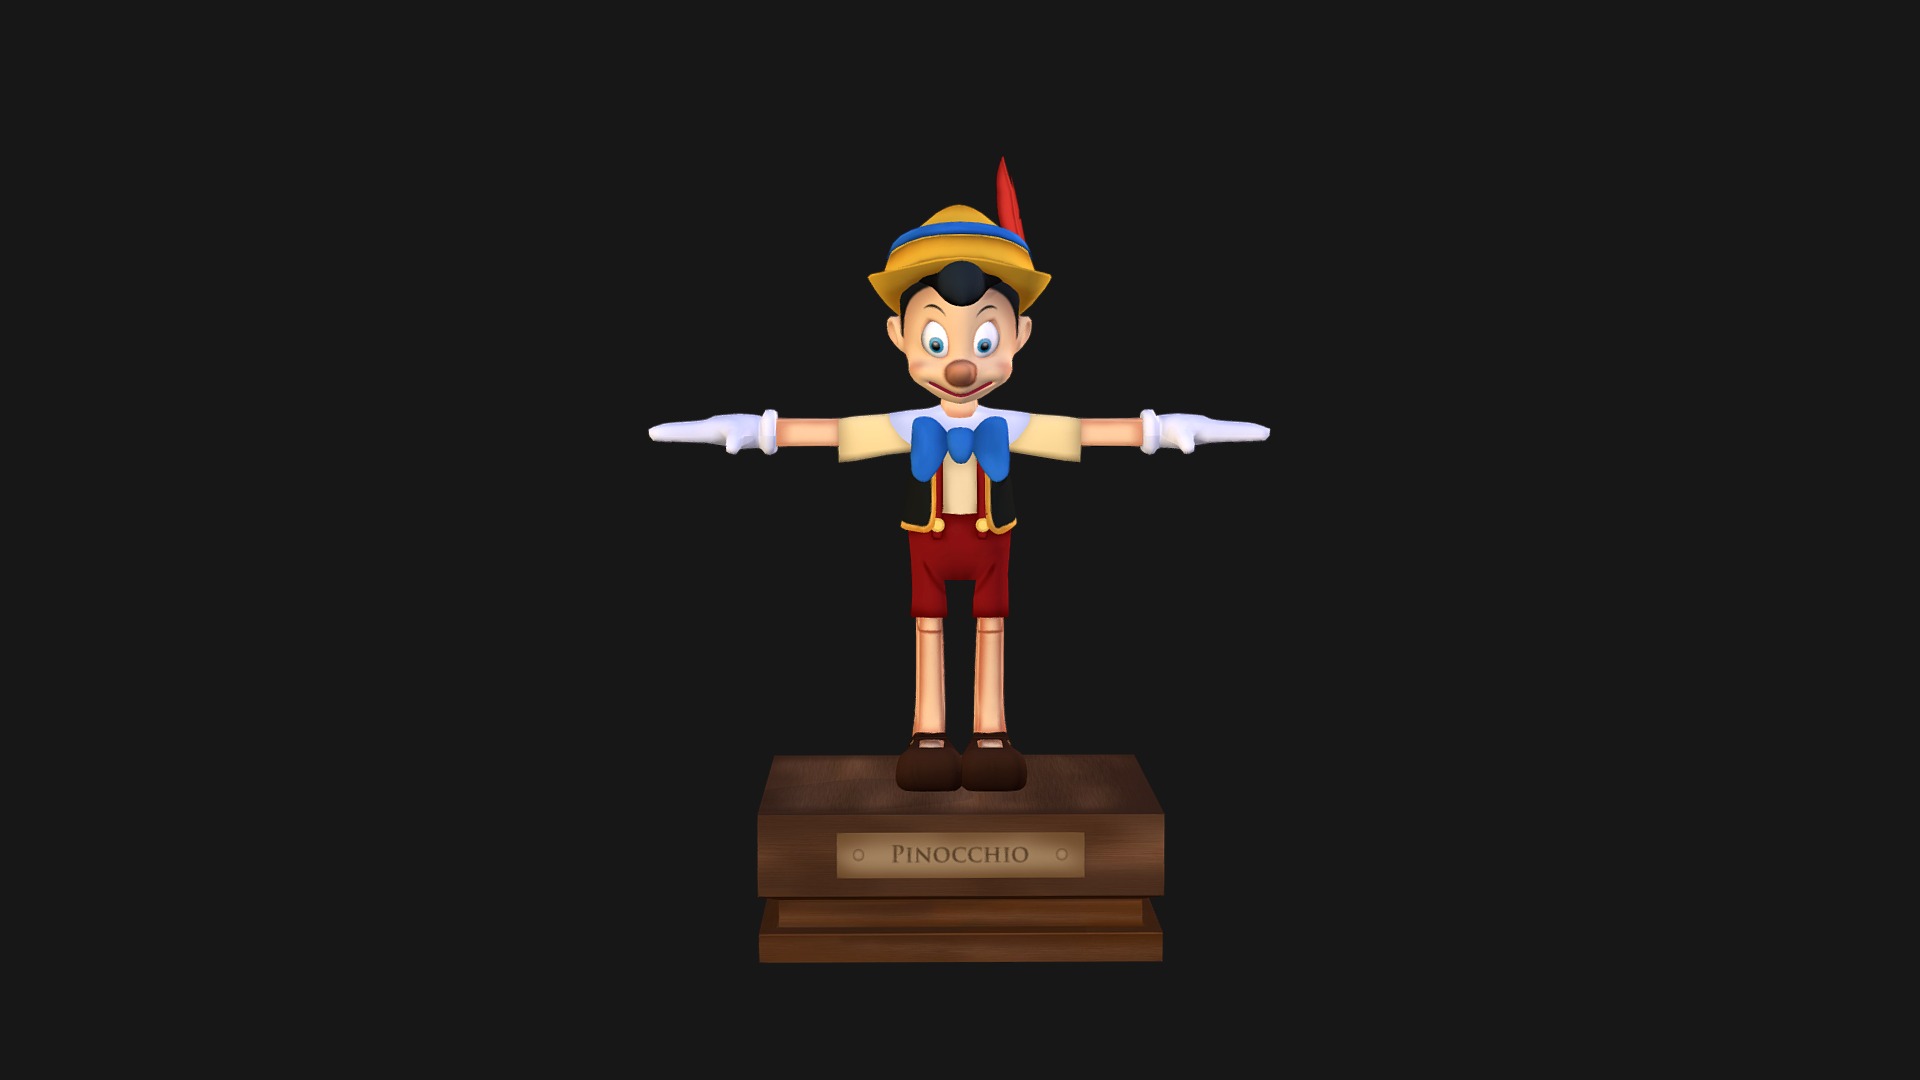 Here is a Disney character I made in my first year of 3D school. 
So I present you my Fanart on Pinocchio - Fanart Pinocchio - 3D model by GingeroDC 3d model